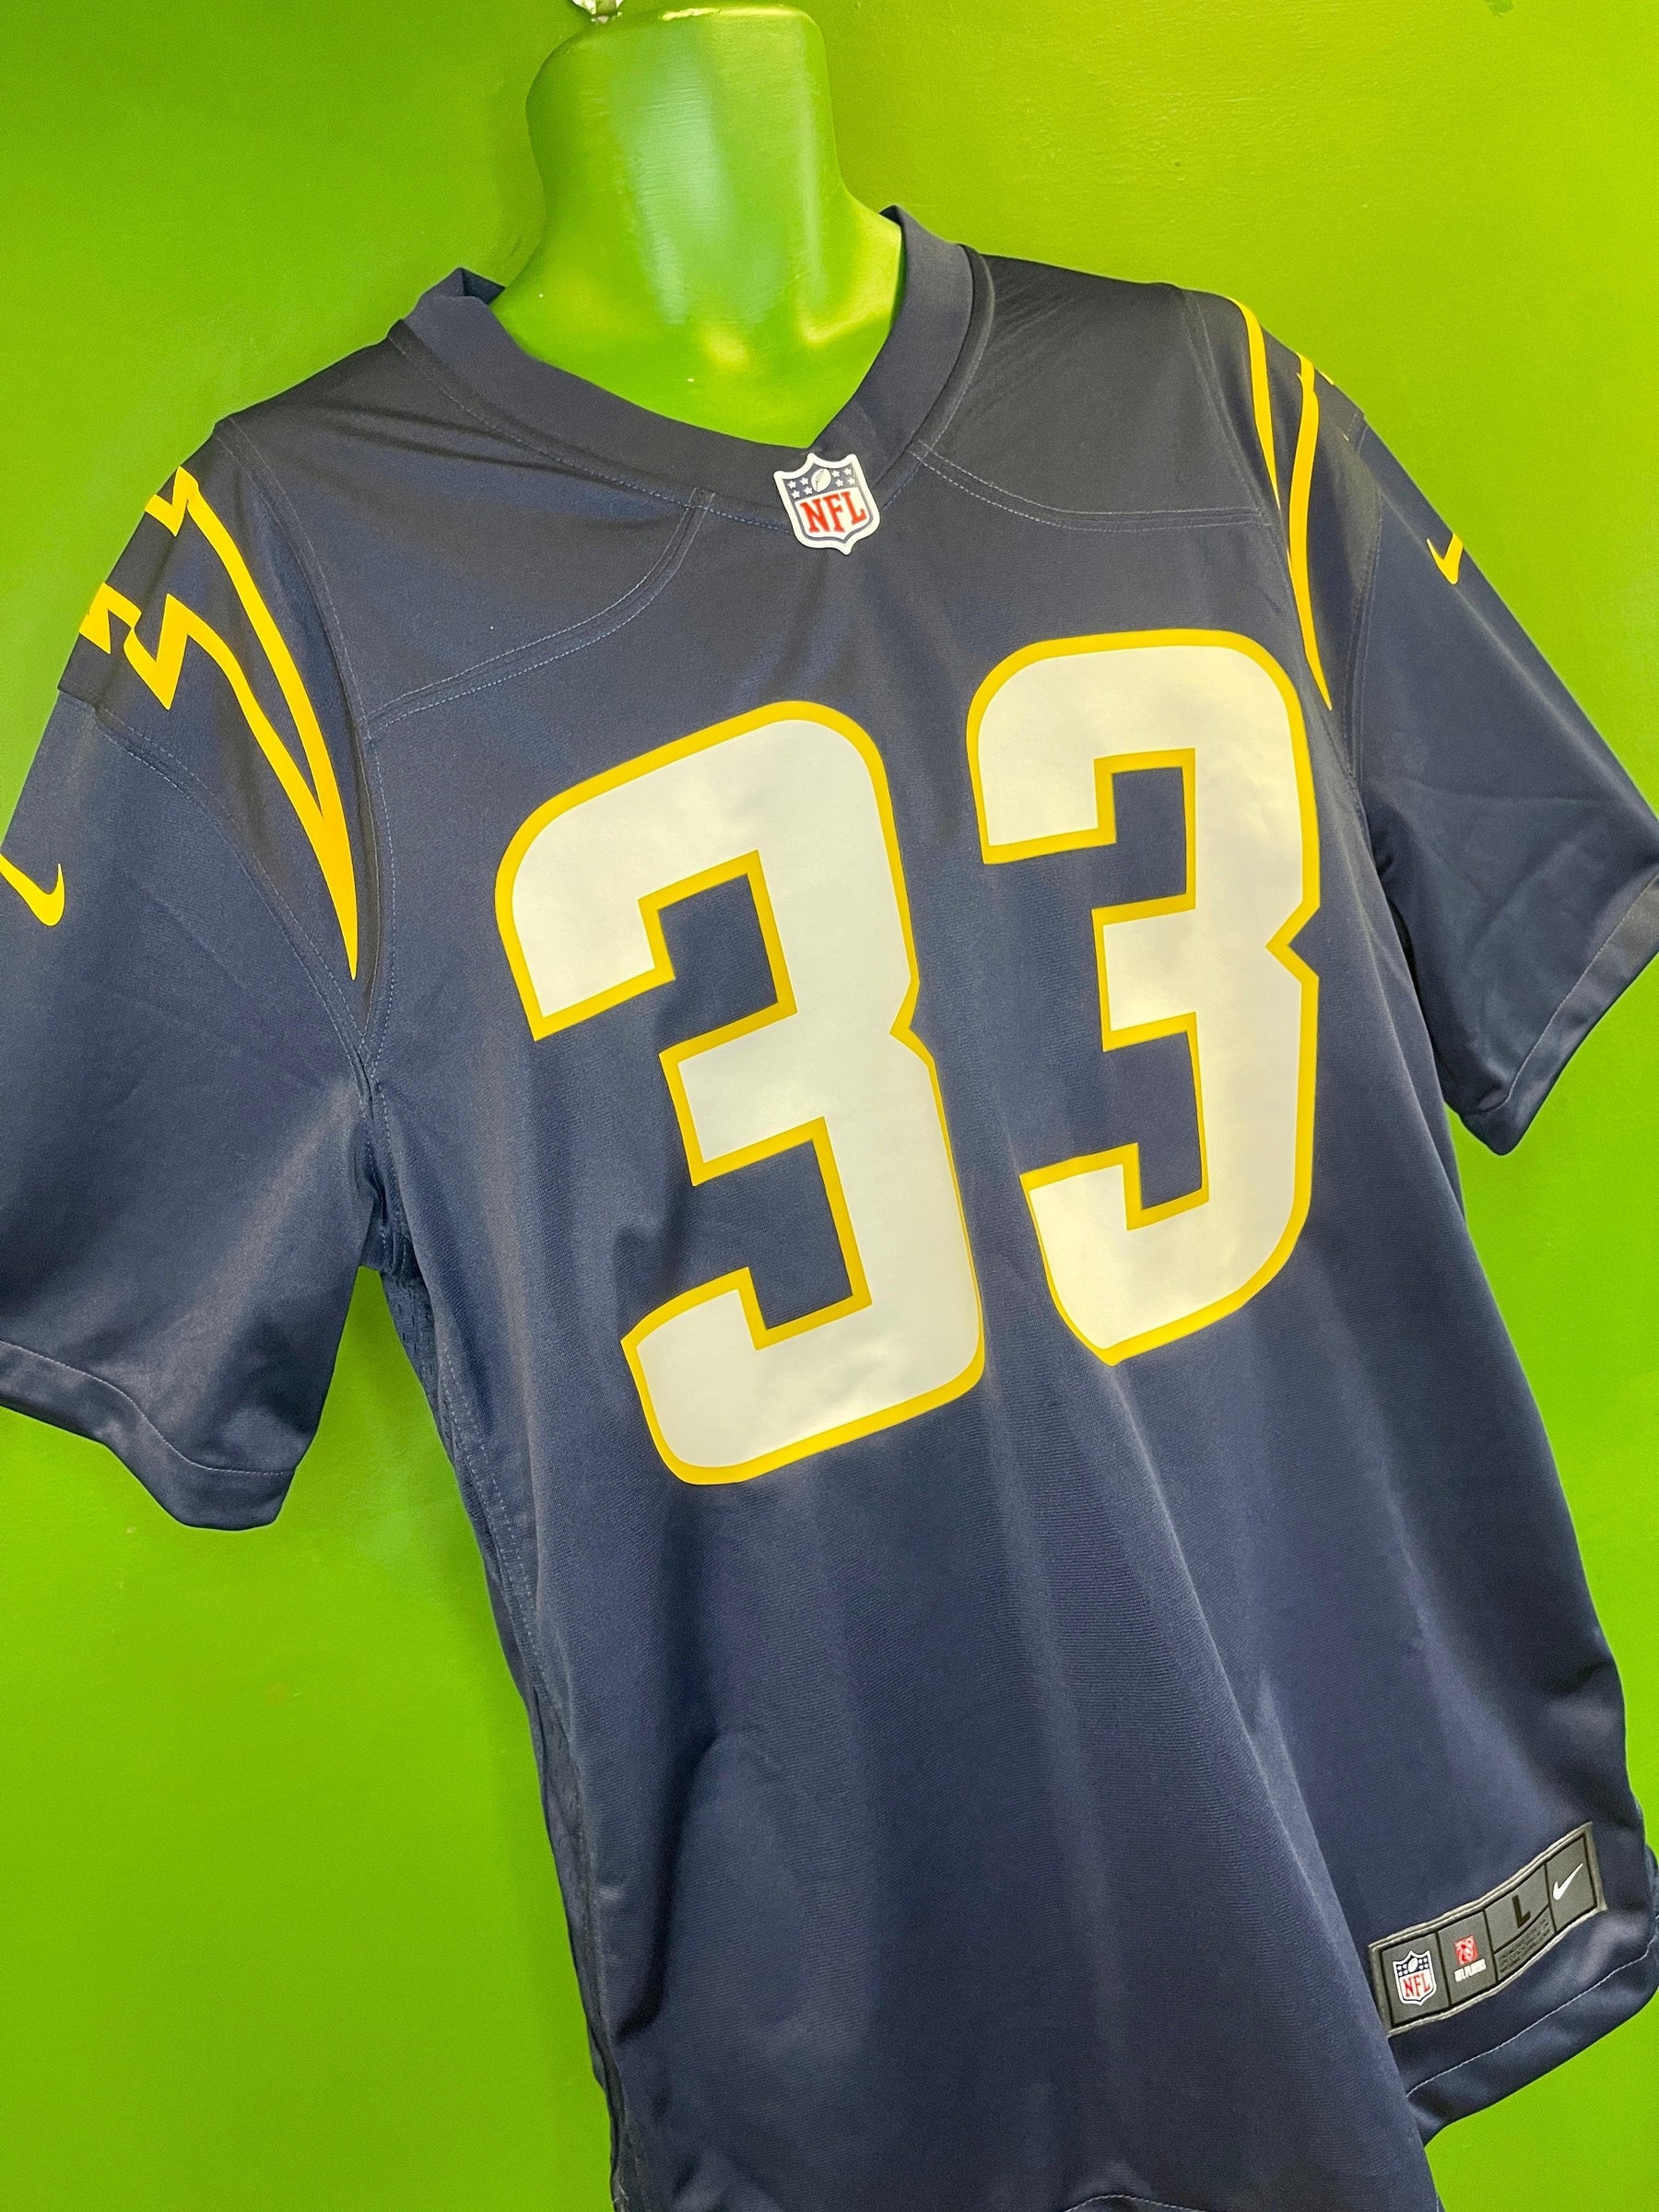 Nike Los Angeles Chargers Men's Game Jersey Derwin James